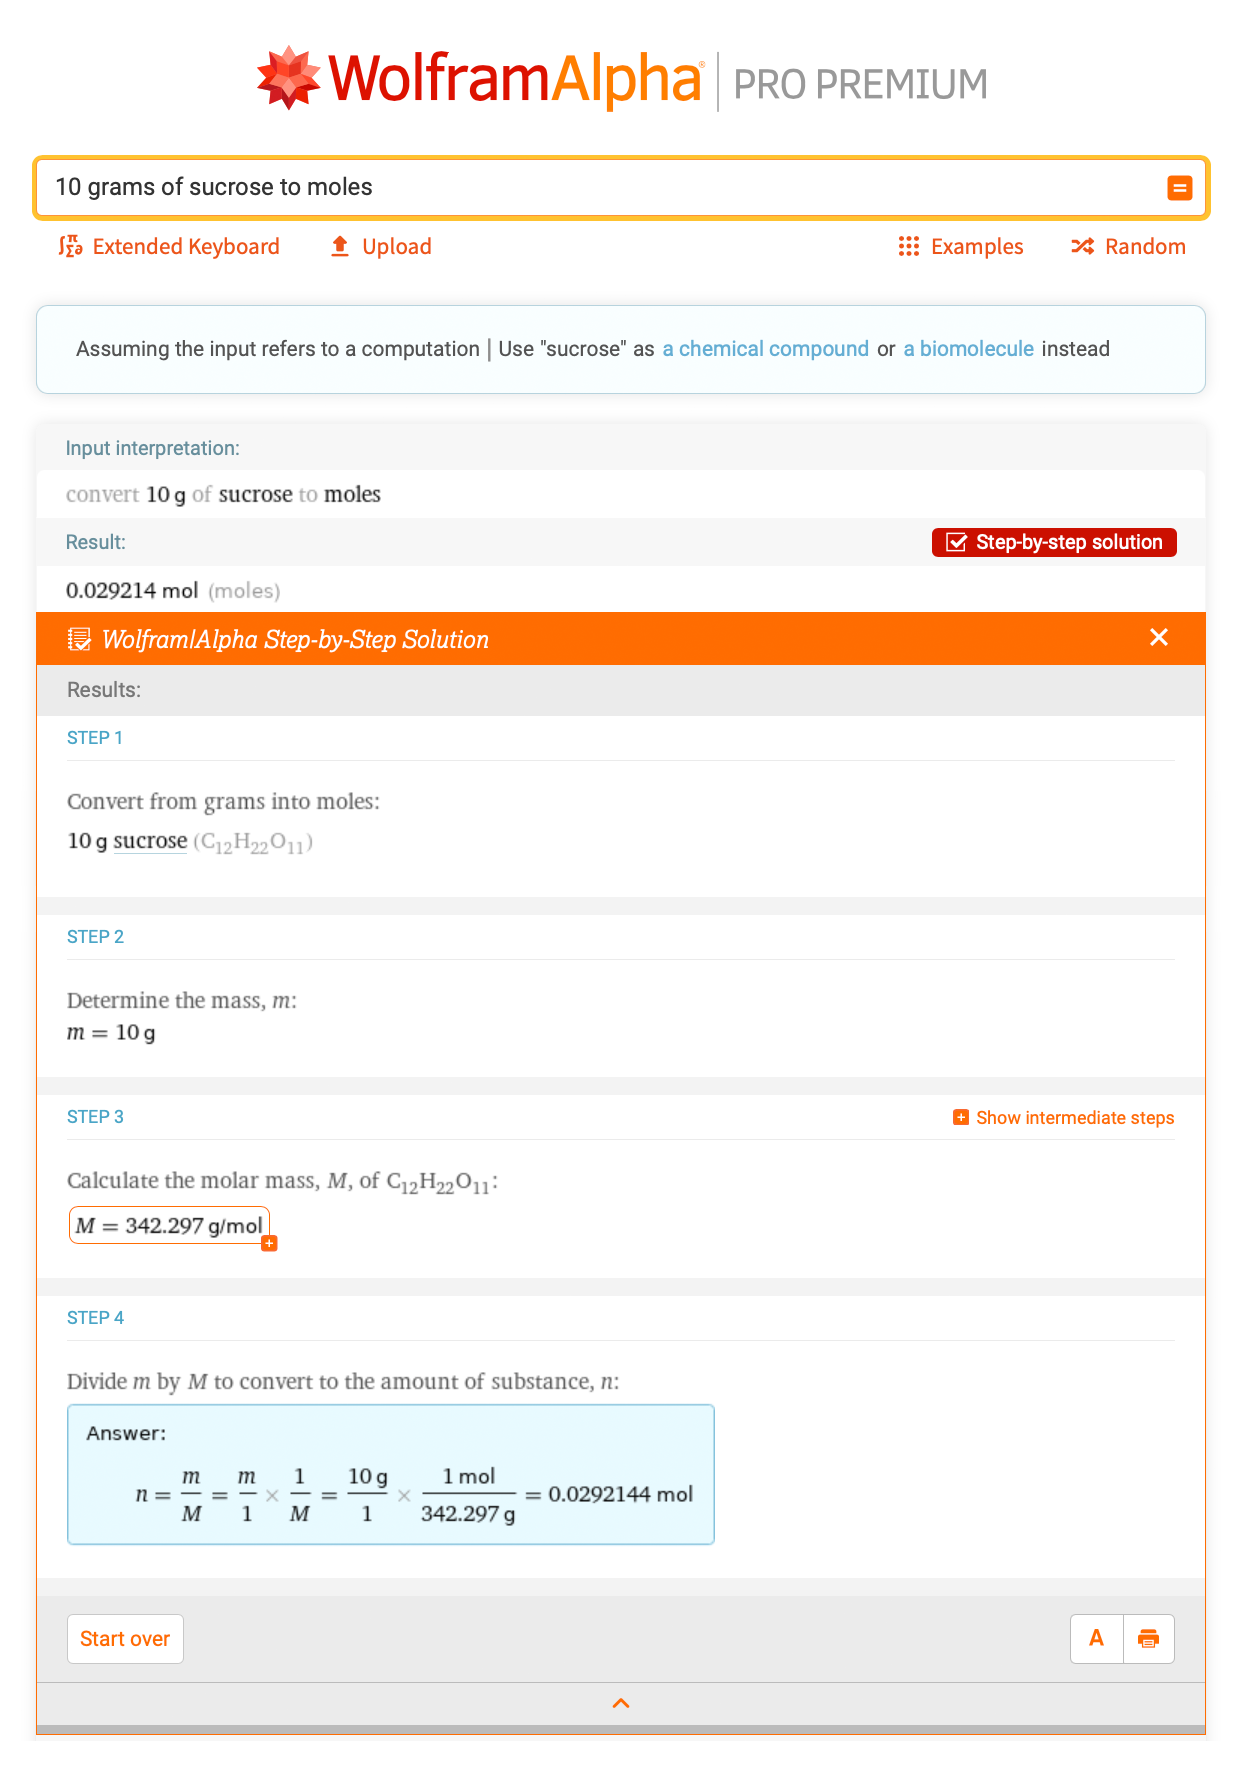 Step-by-Step Math Tools in Wolfram|Alpha Help Your Chemistry Course Prep |  by Tech-Based Teaching Editor | Tech-Based Teaching: Computational Thinking  in the Classroom | Medium